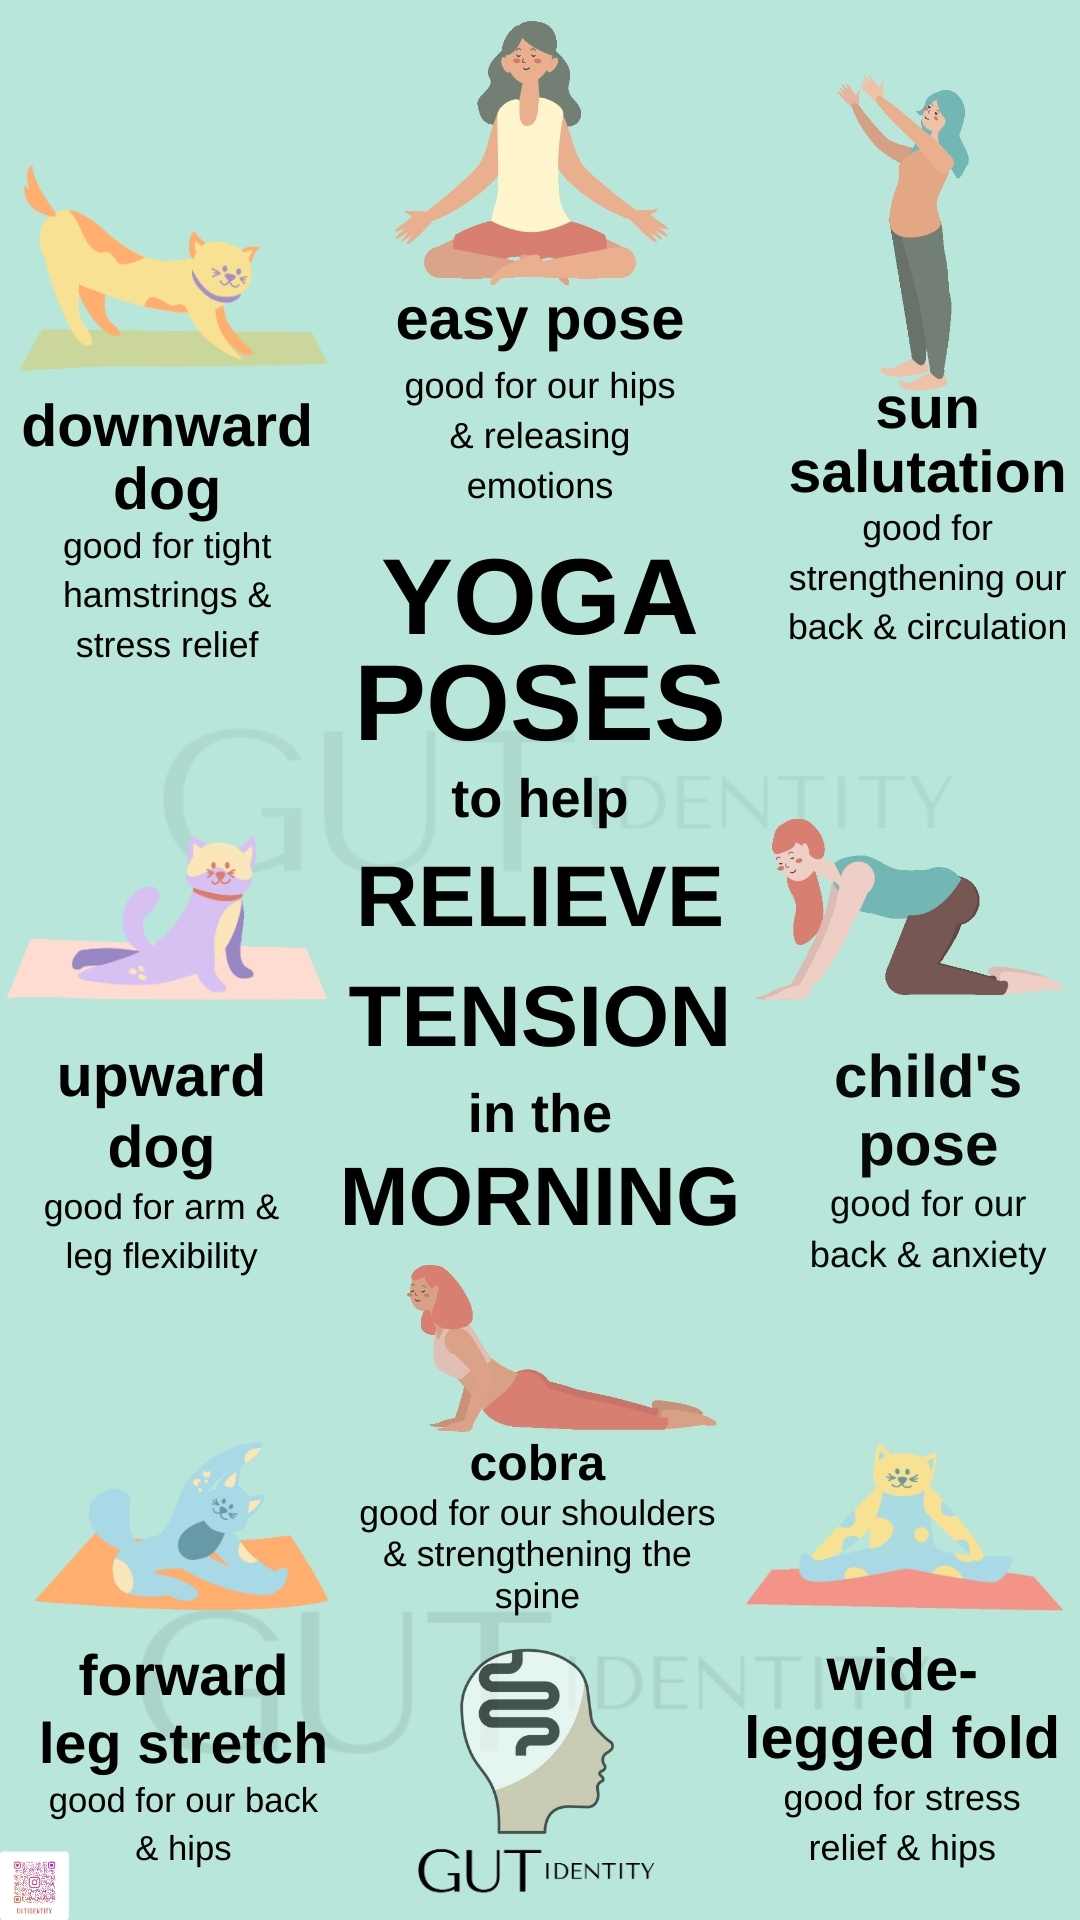 Yoga Poses to Relieve Tension in the Morning by Gutidentity